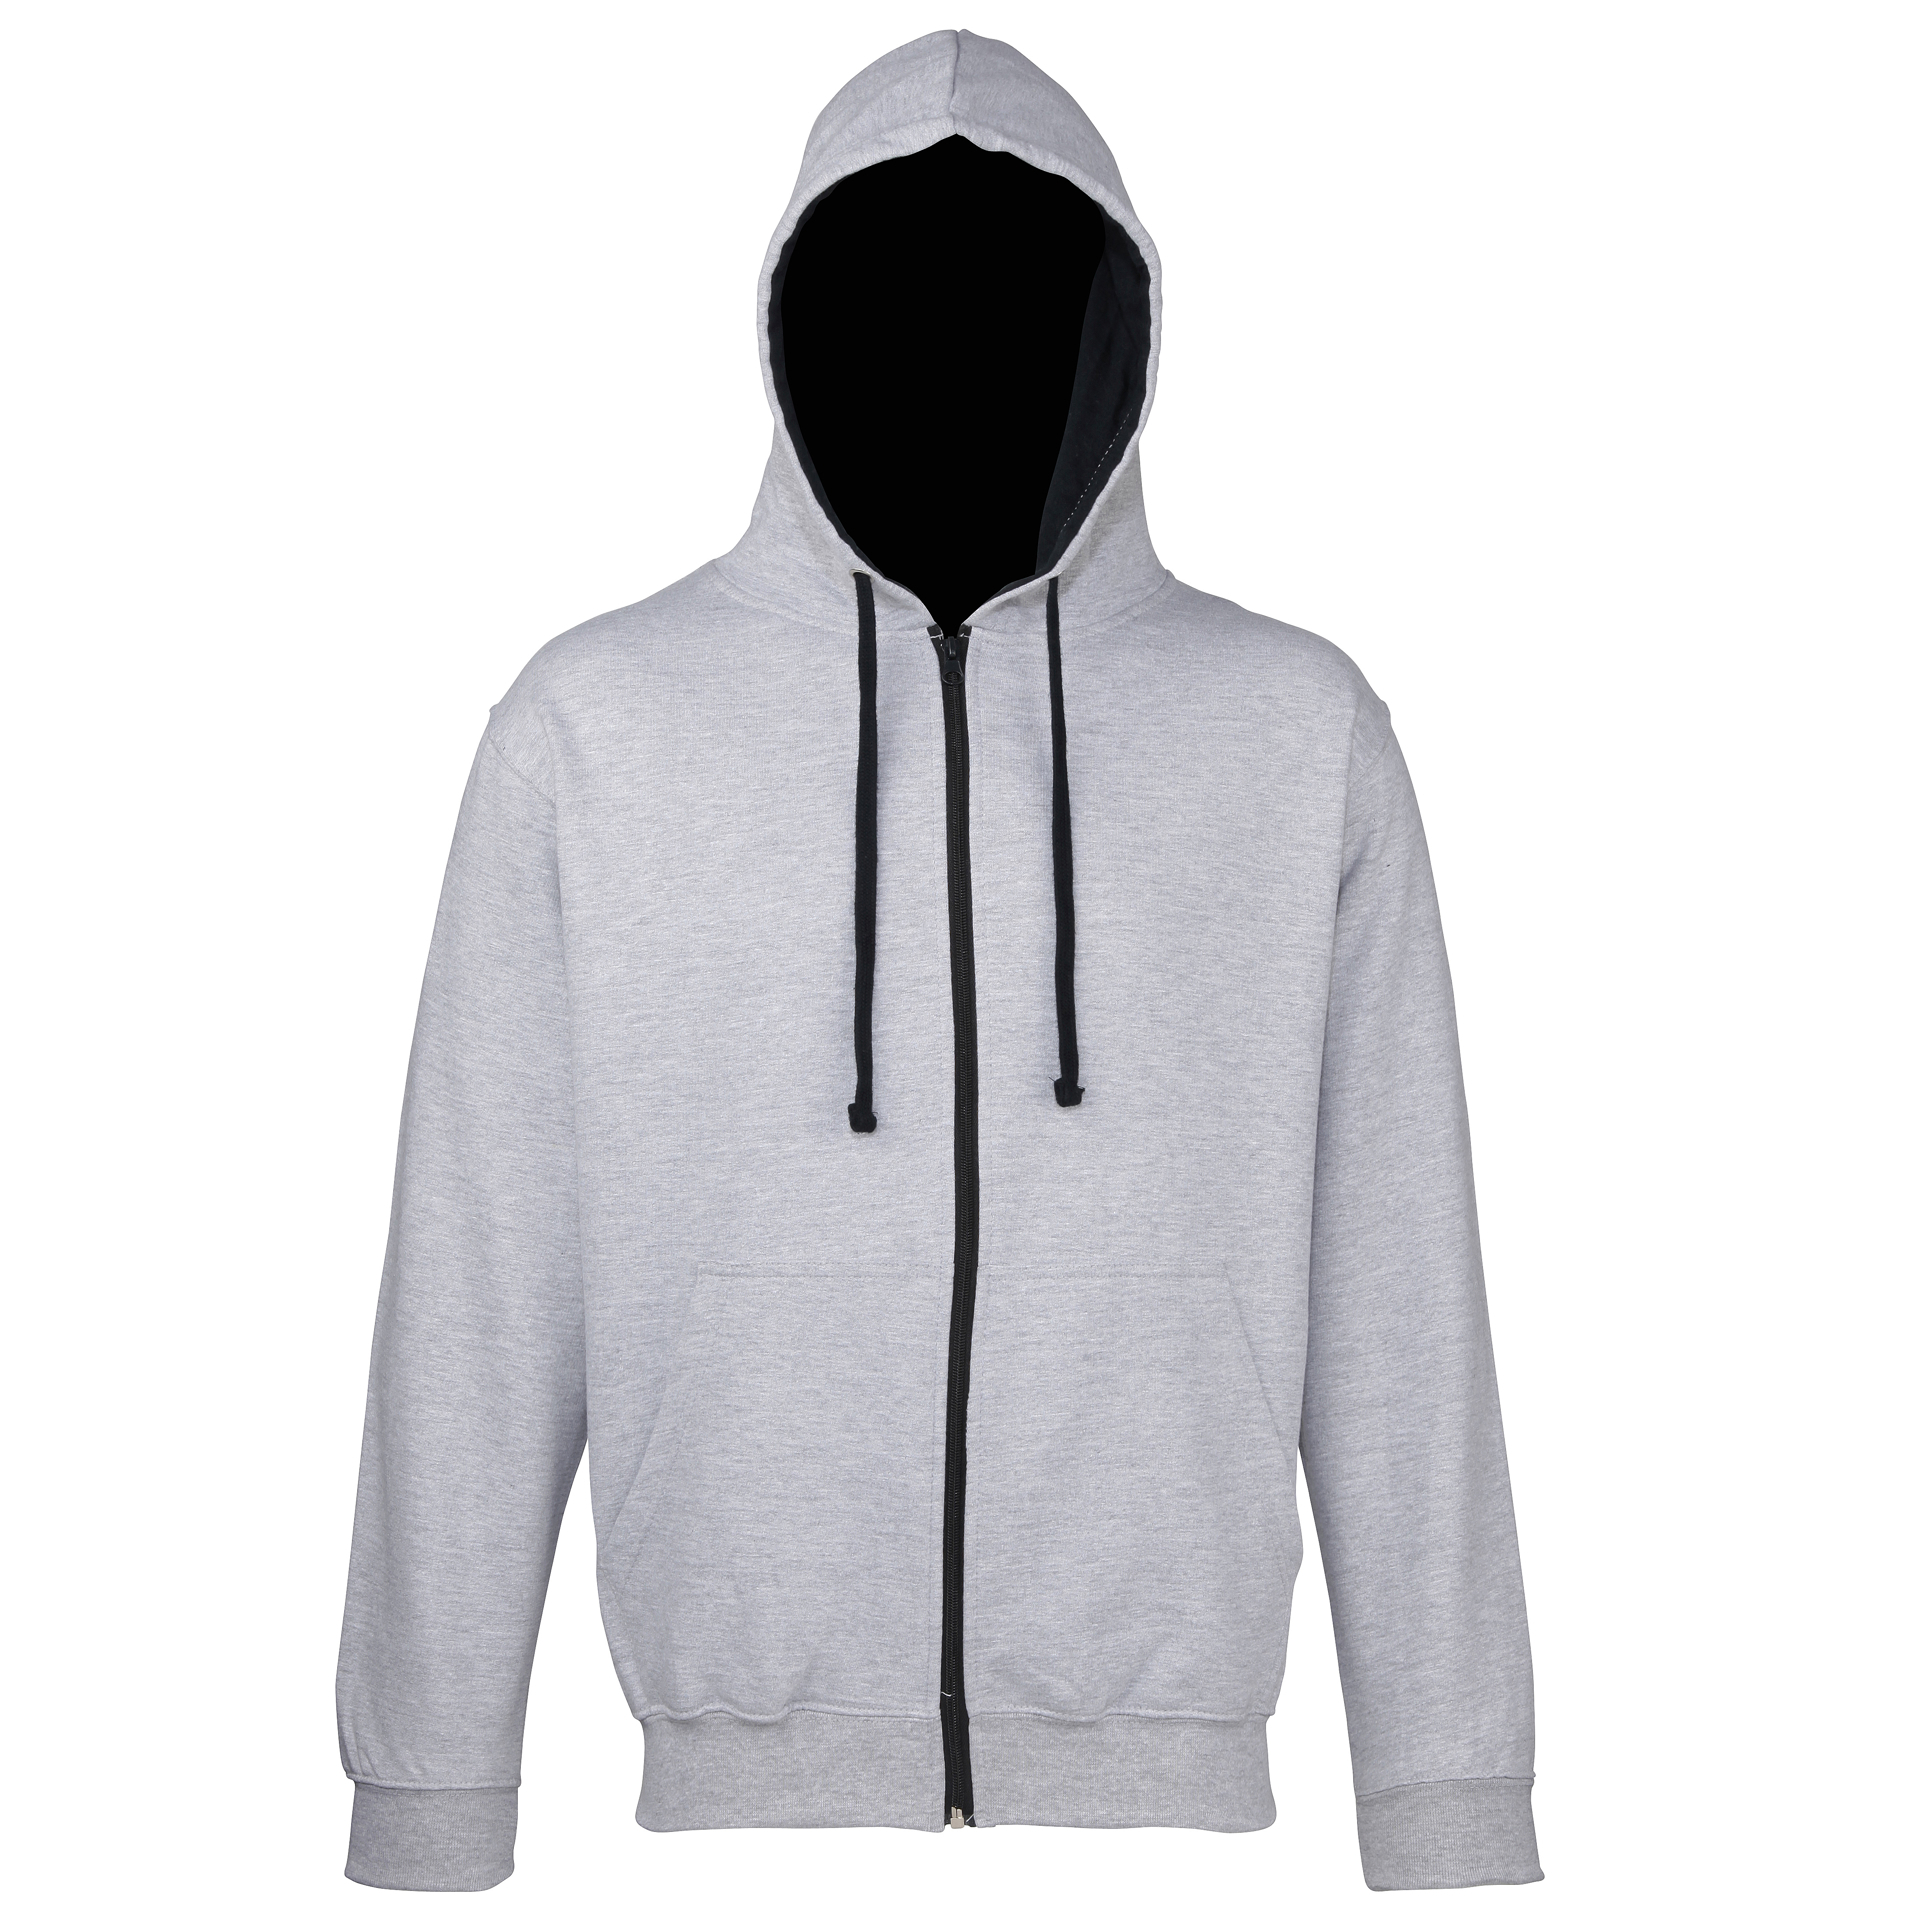 Men's Varsity Hoodie in grey with black details and lining